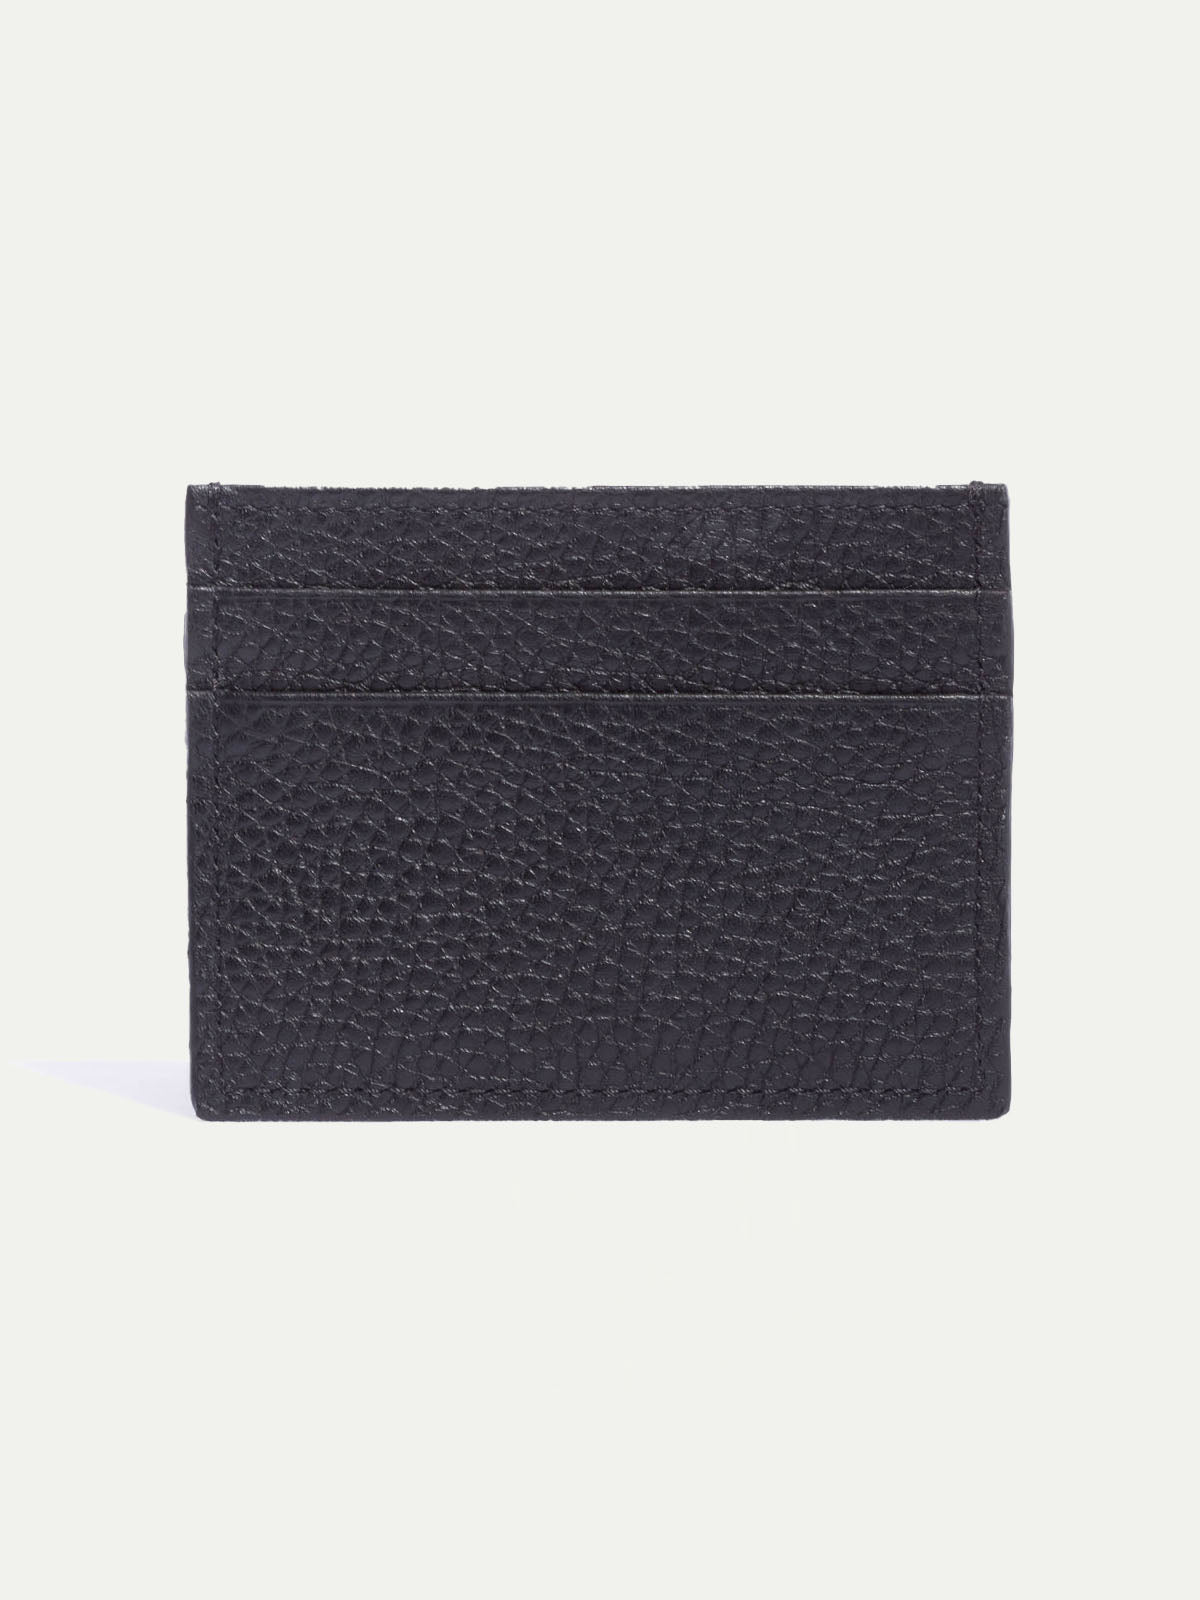 Black leather card holder - Made in Italy - Pini Parma